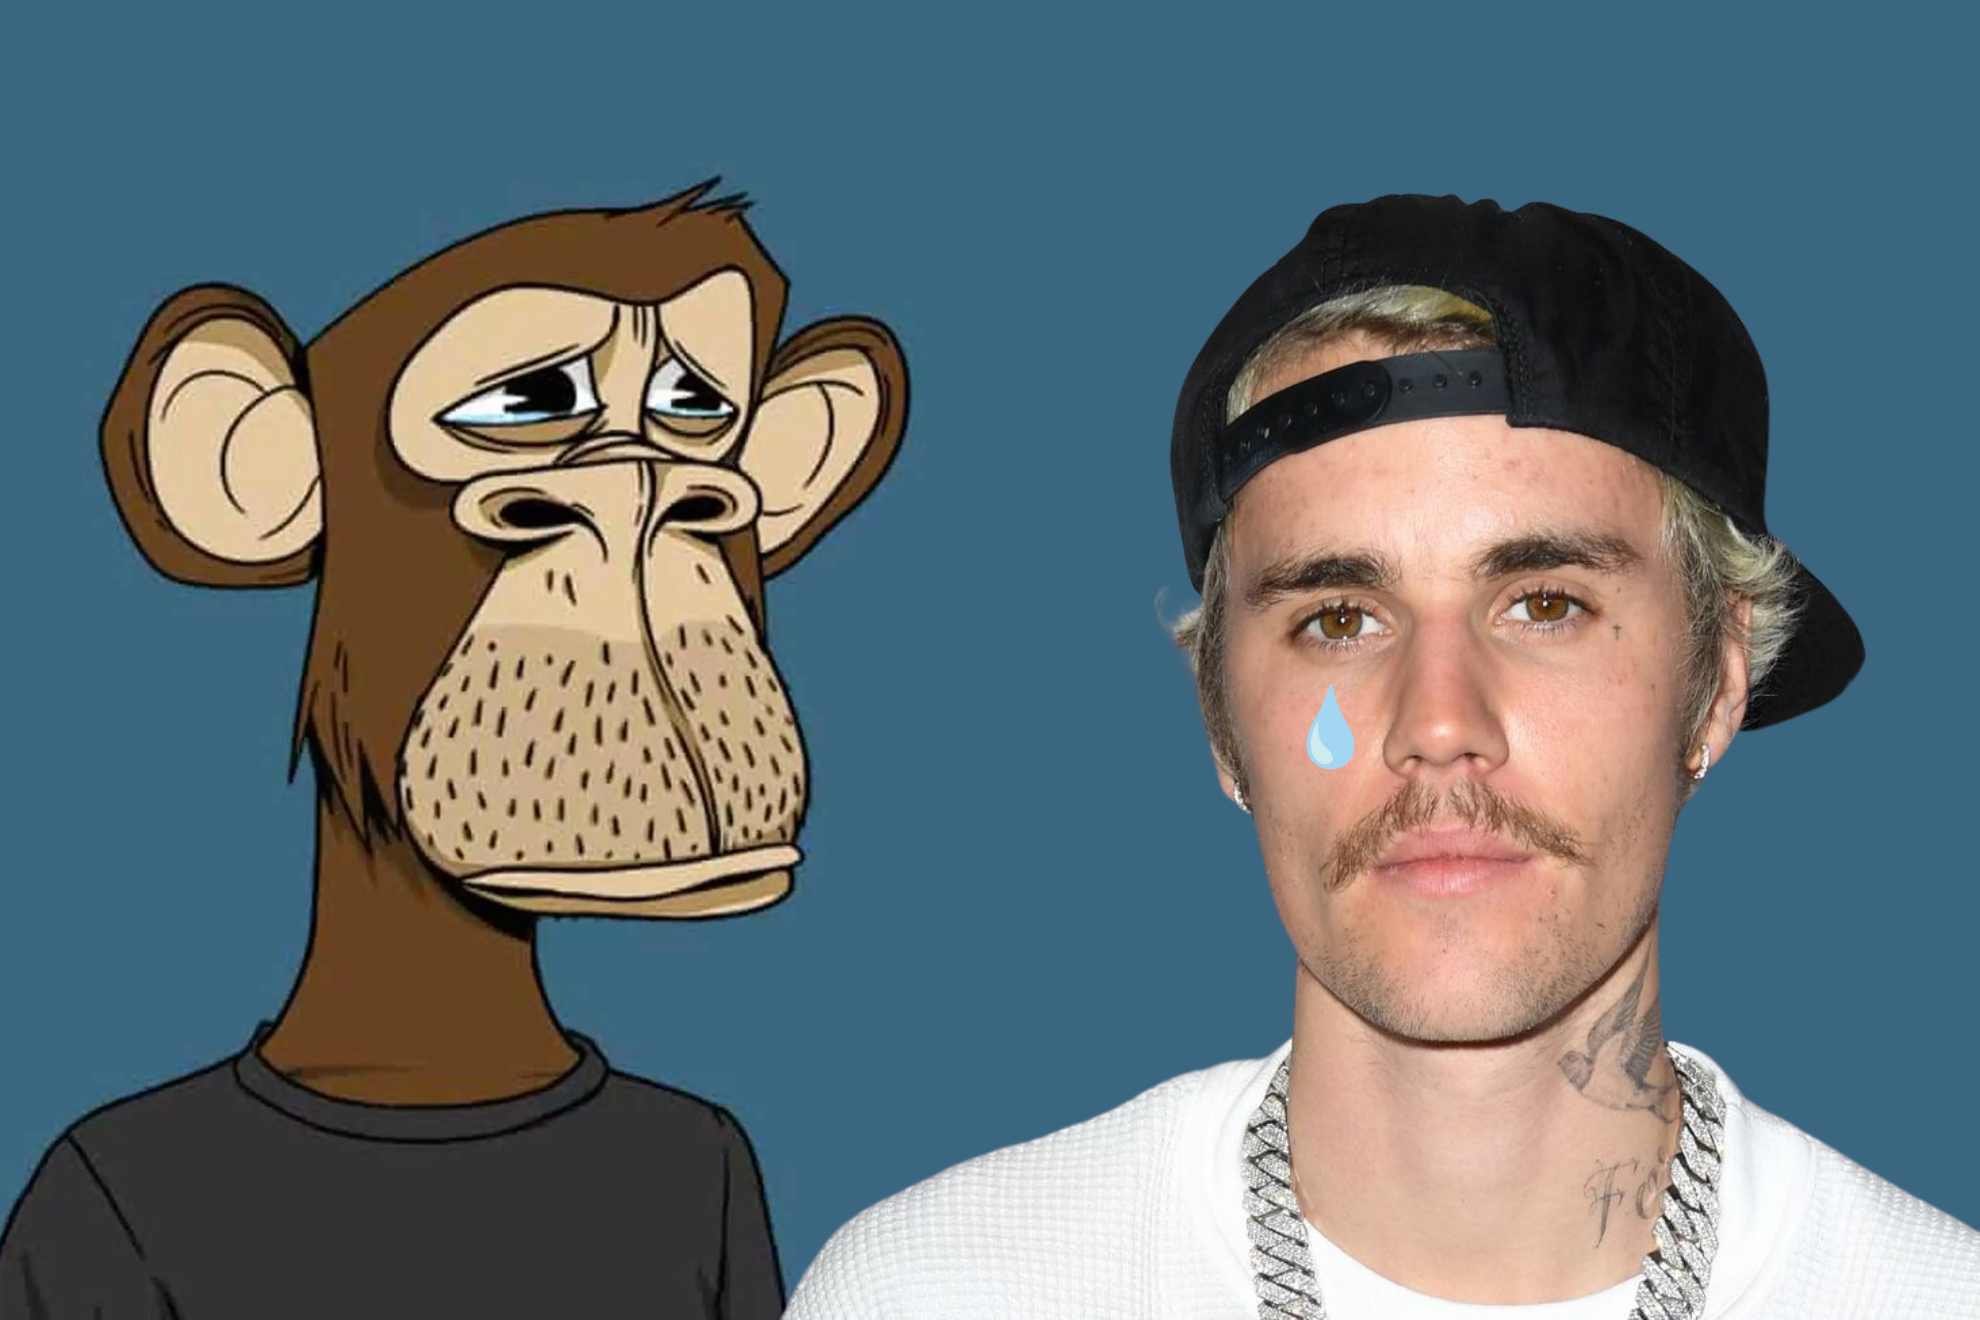 Justin Biebers hefty investment in the Bored Ape Non-fungible token (NFT) series was